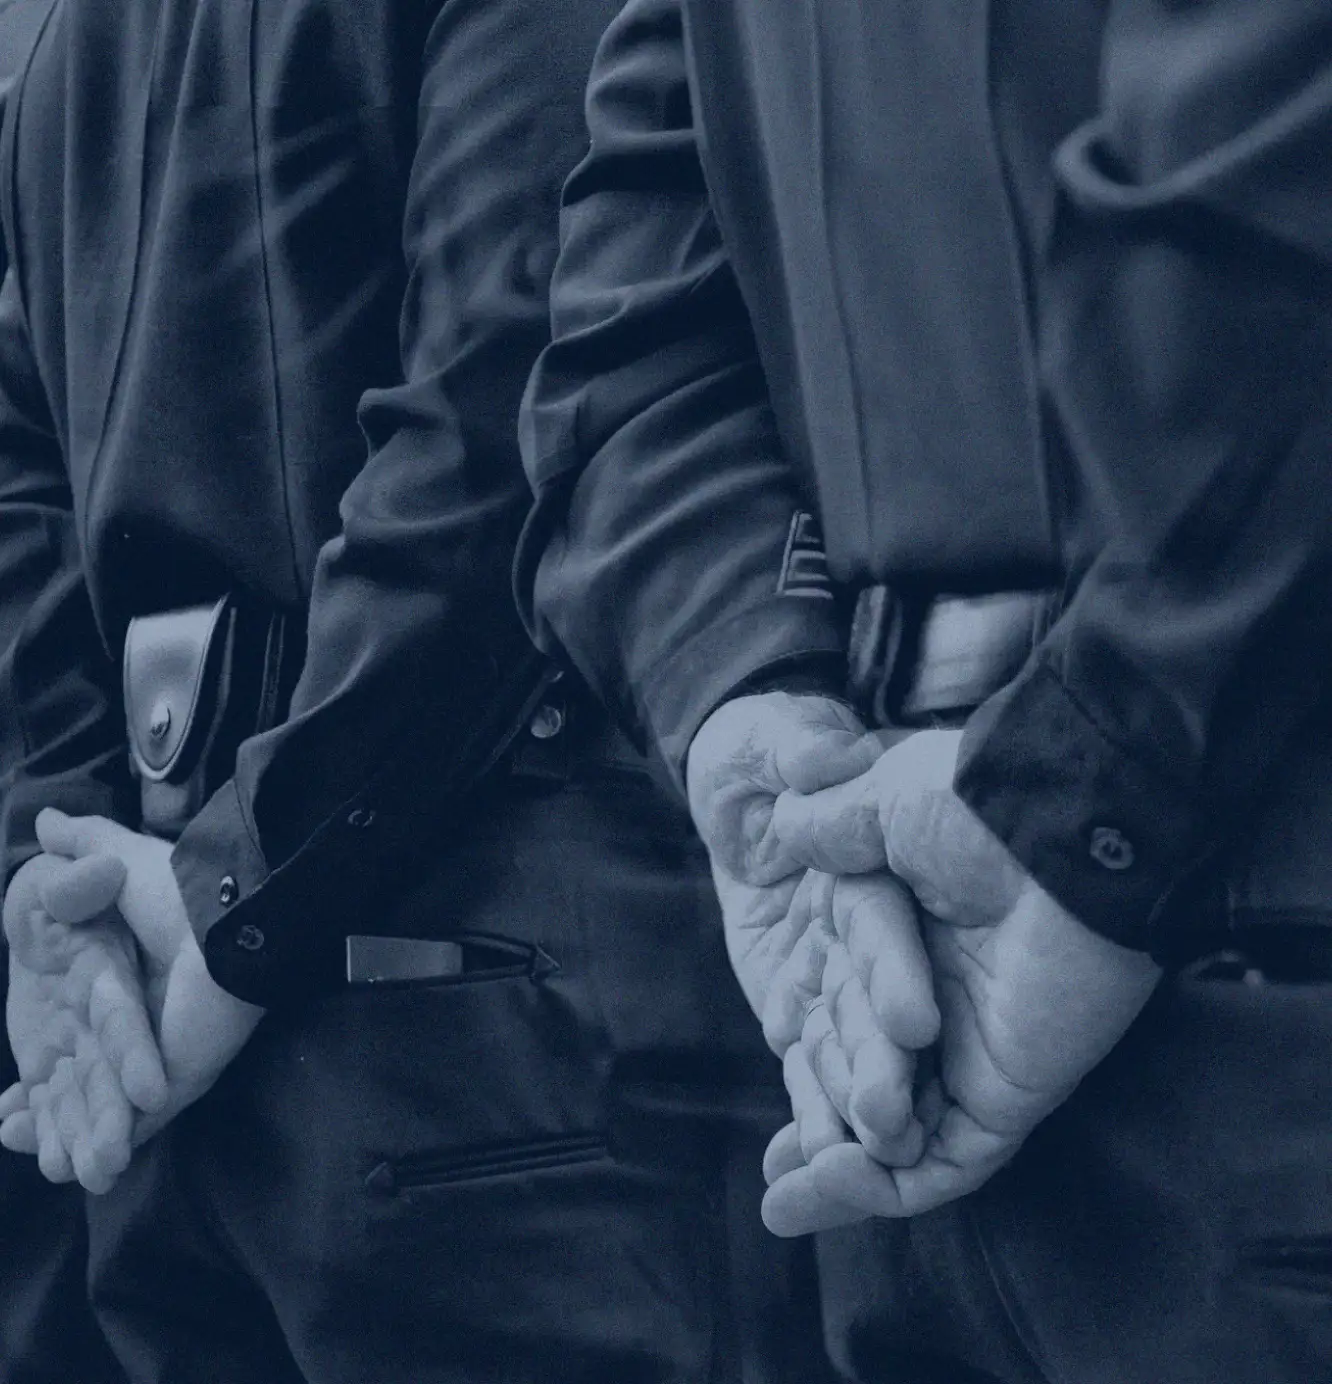 Officers holding their hands behind ther backs